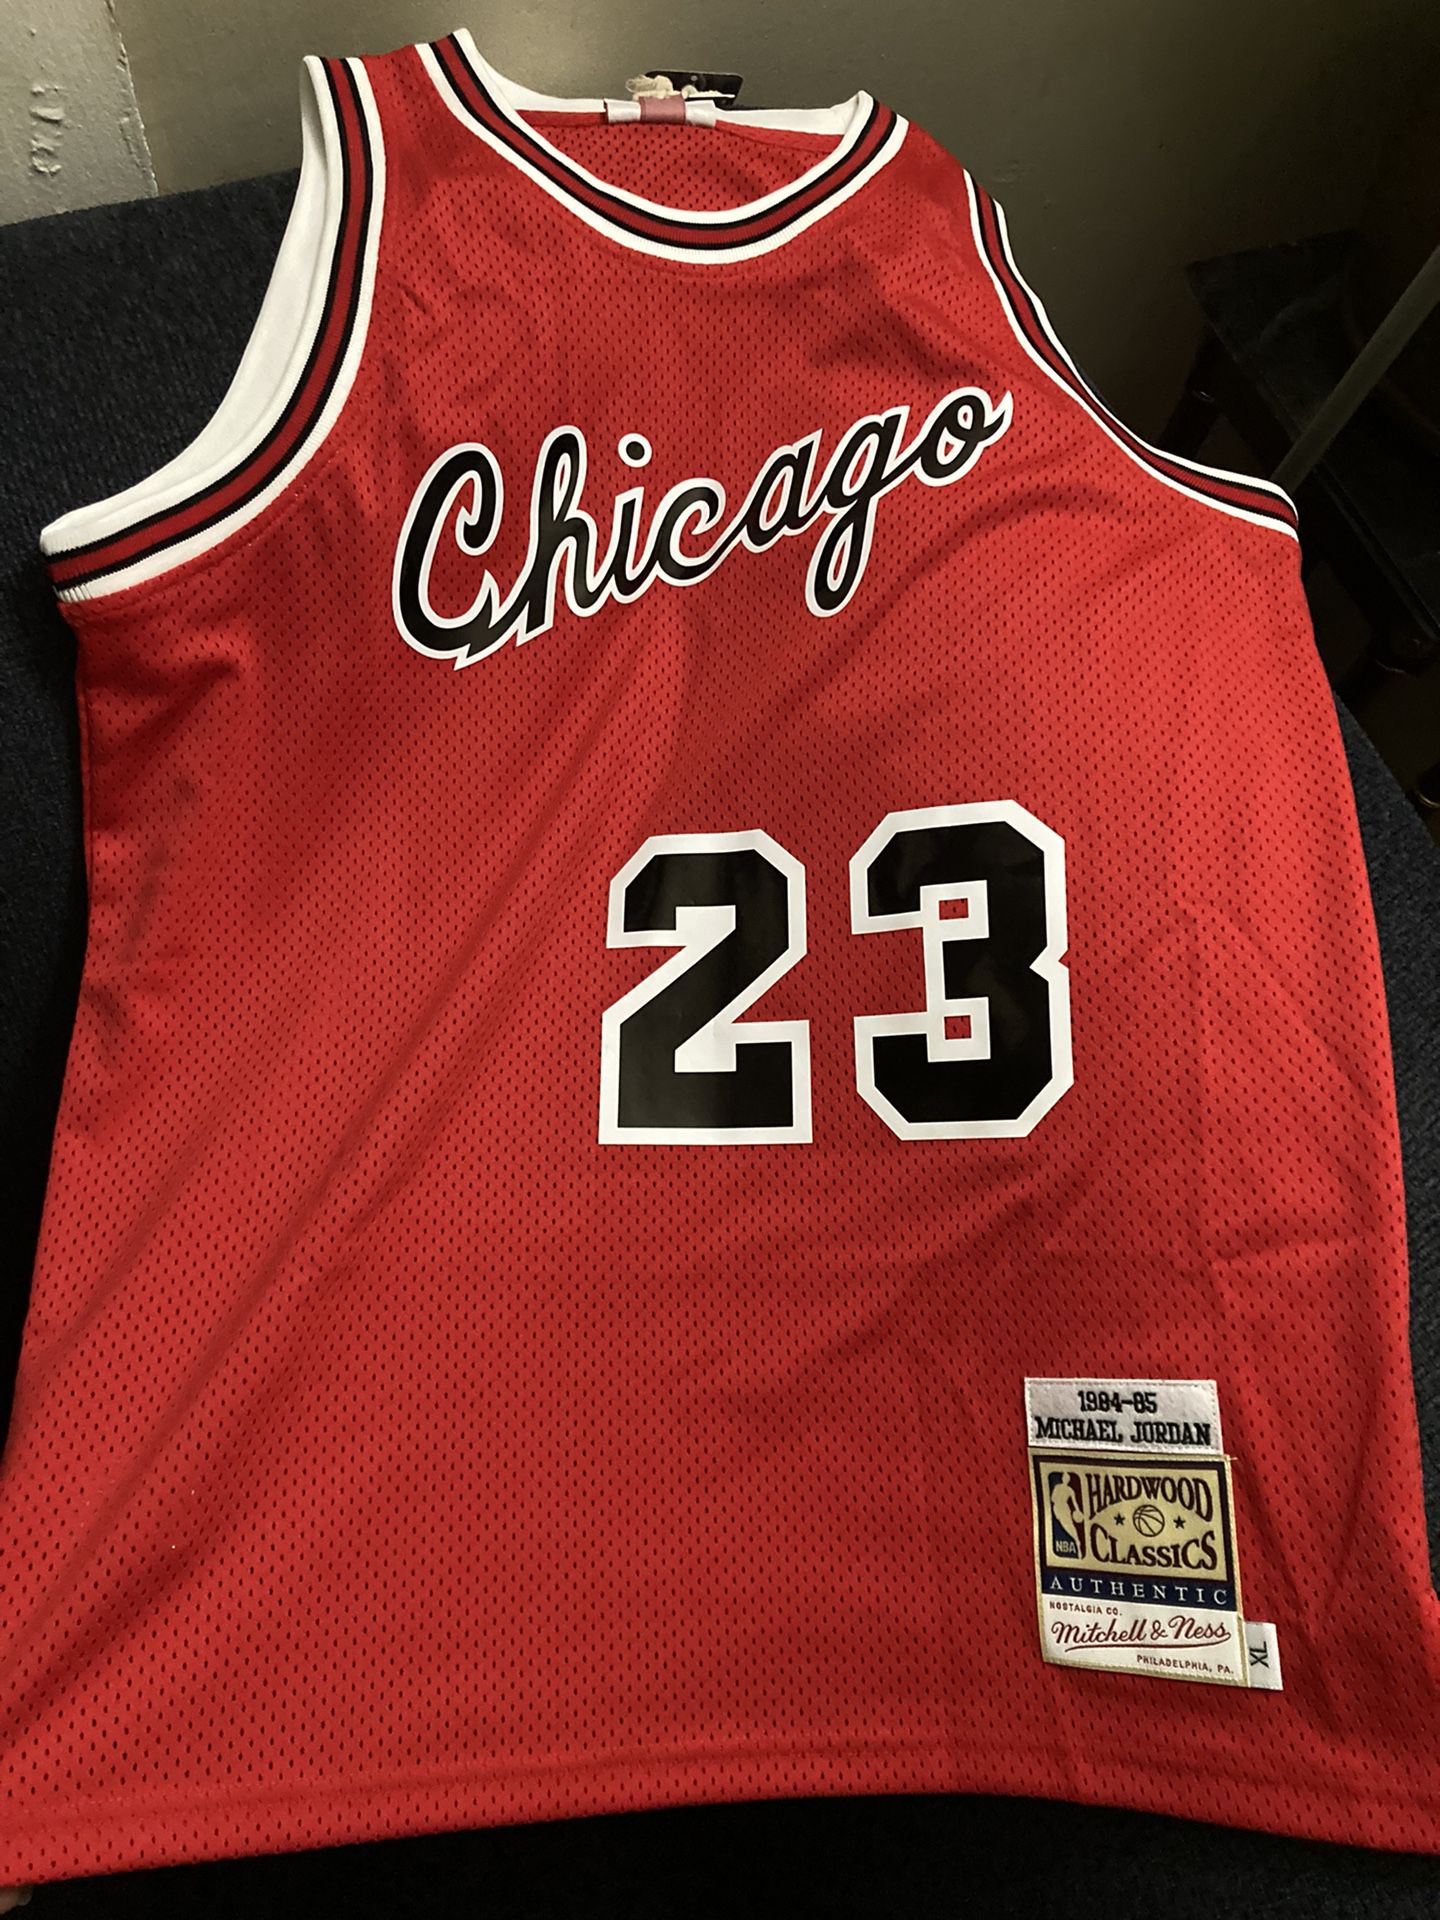 Youth Mitchell & Ness Michael Jordan Red Chicago Bulls 1984-85 Hardwood Classics Authentic Jersey Size: Small